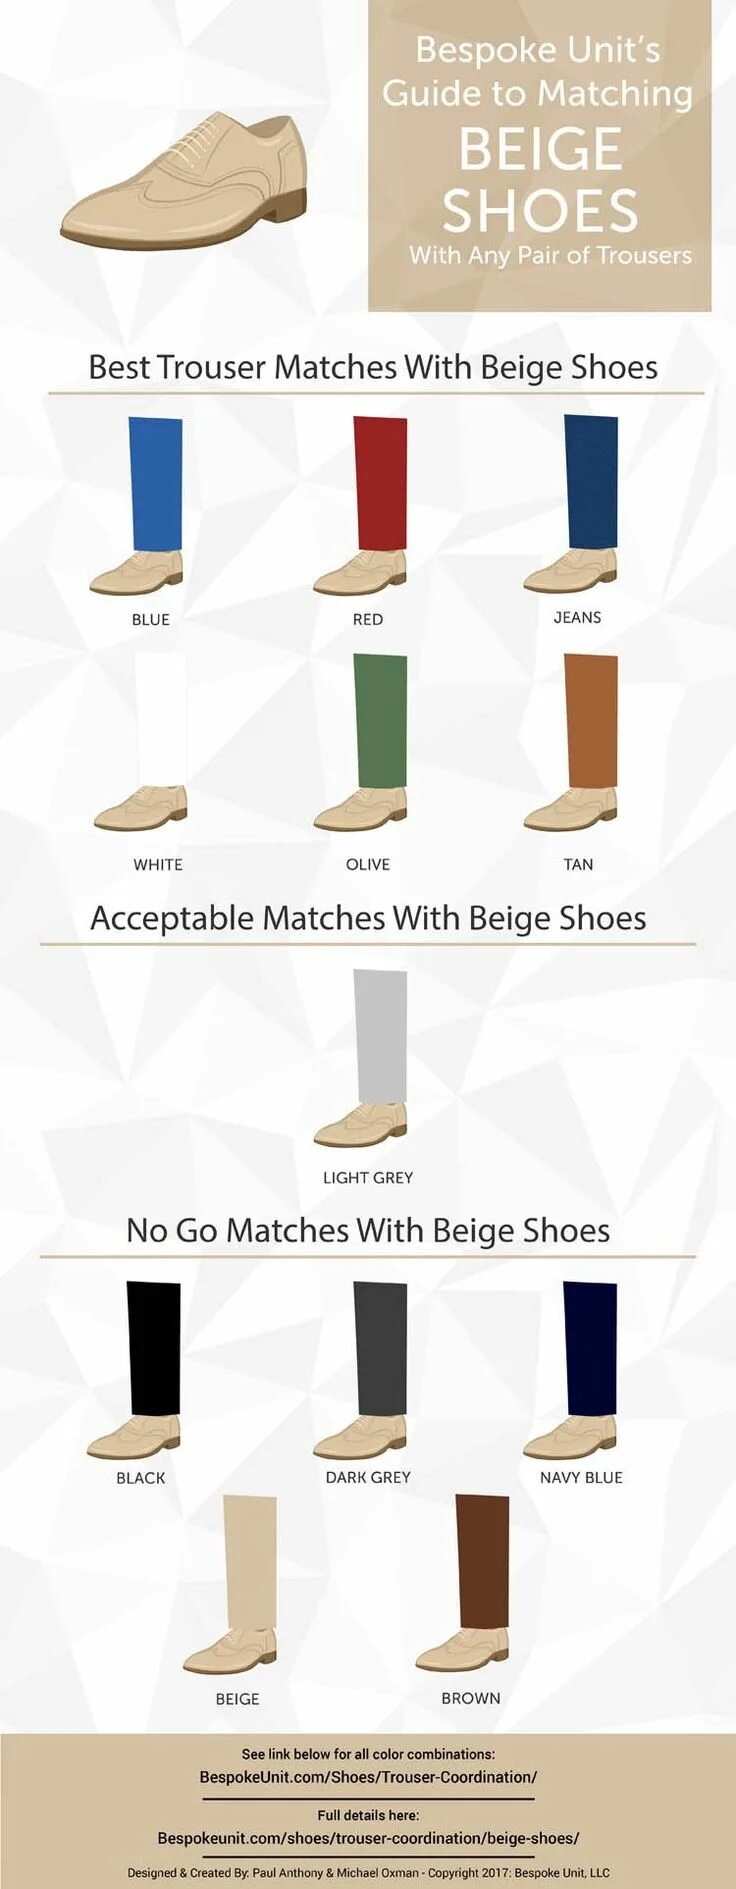 Match guide. Men's Beige Shoes. Best Combos for men for Beige trousers. Colour Match Suit and Shoes. Colour Shoes Match with Costumes.